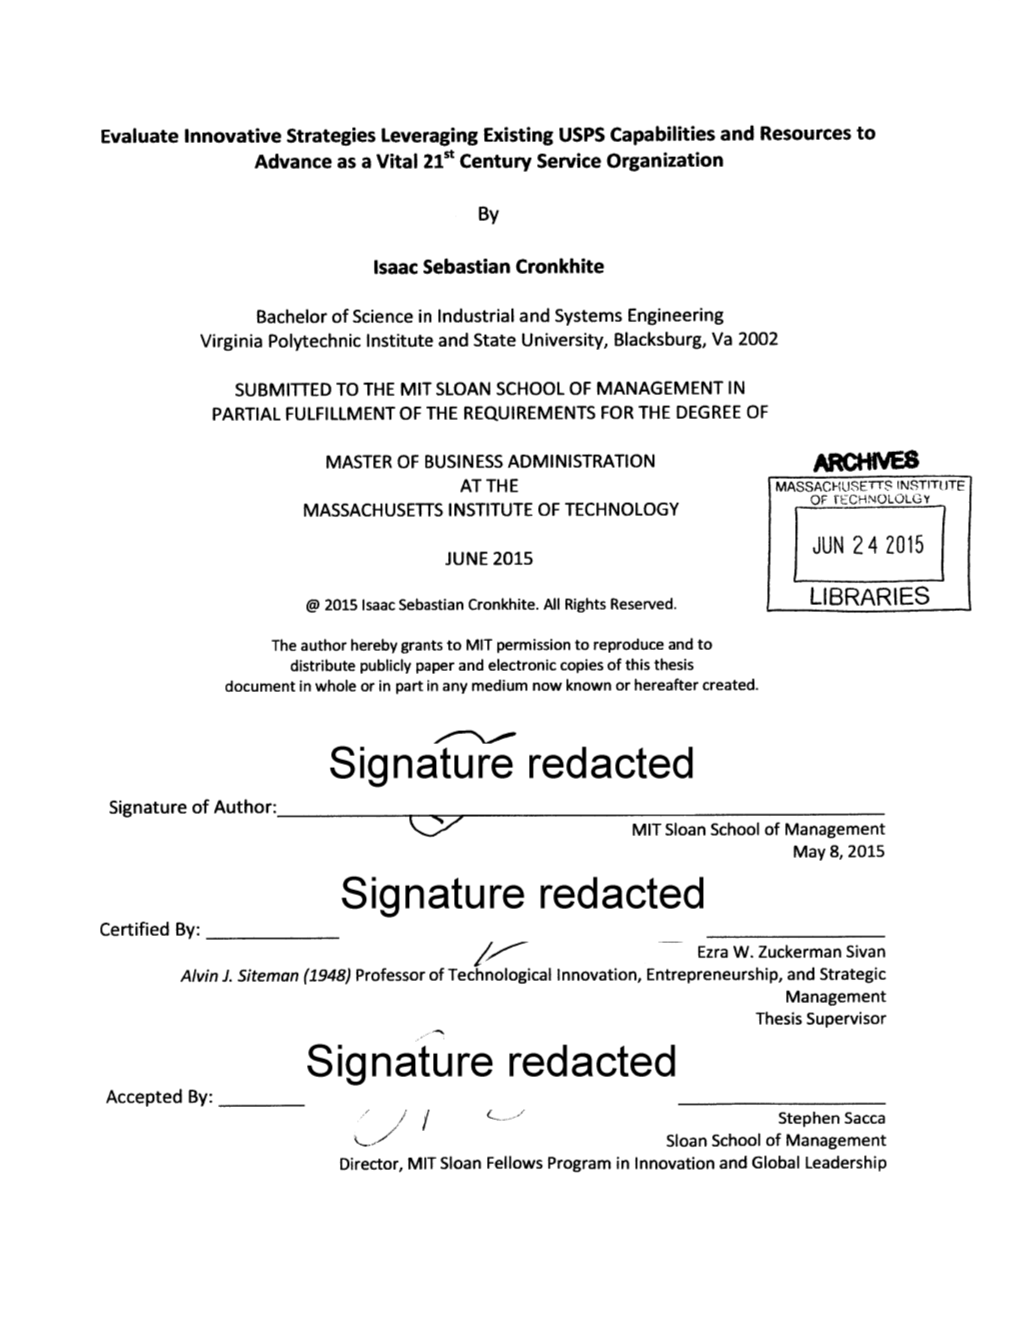 Signature Redacted Signature of Author: MIT Sloan School of Management May 8, 2015 Signature Redacted Certified By: Ezra W